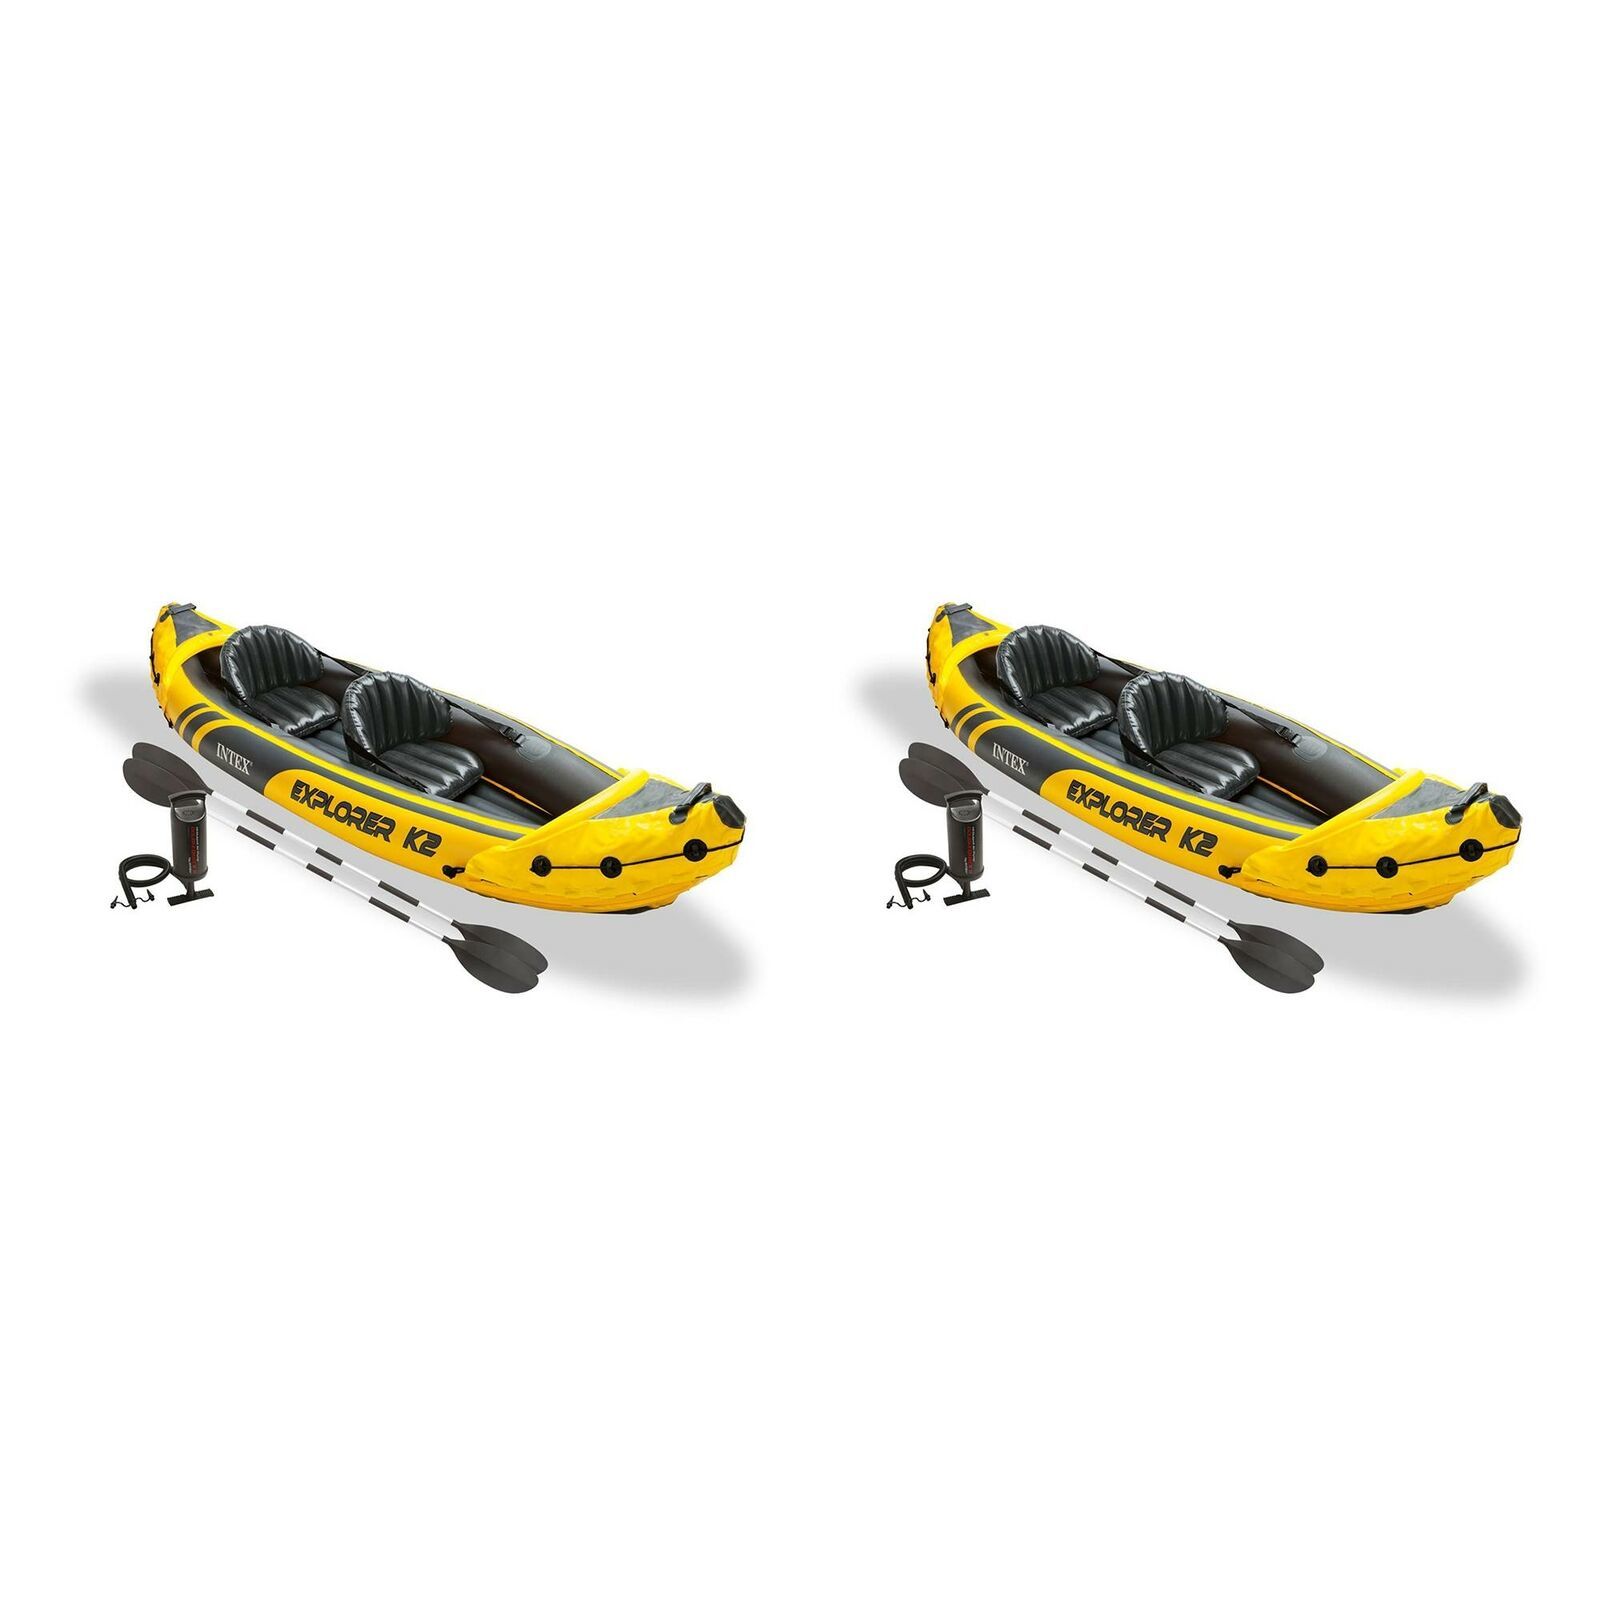 Intex Explorer K2 Yellow 2 Person Inflatable Kayak with Oars & Air Pump (2 Pack) - $454.99